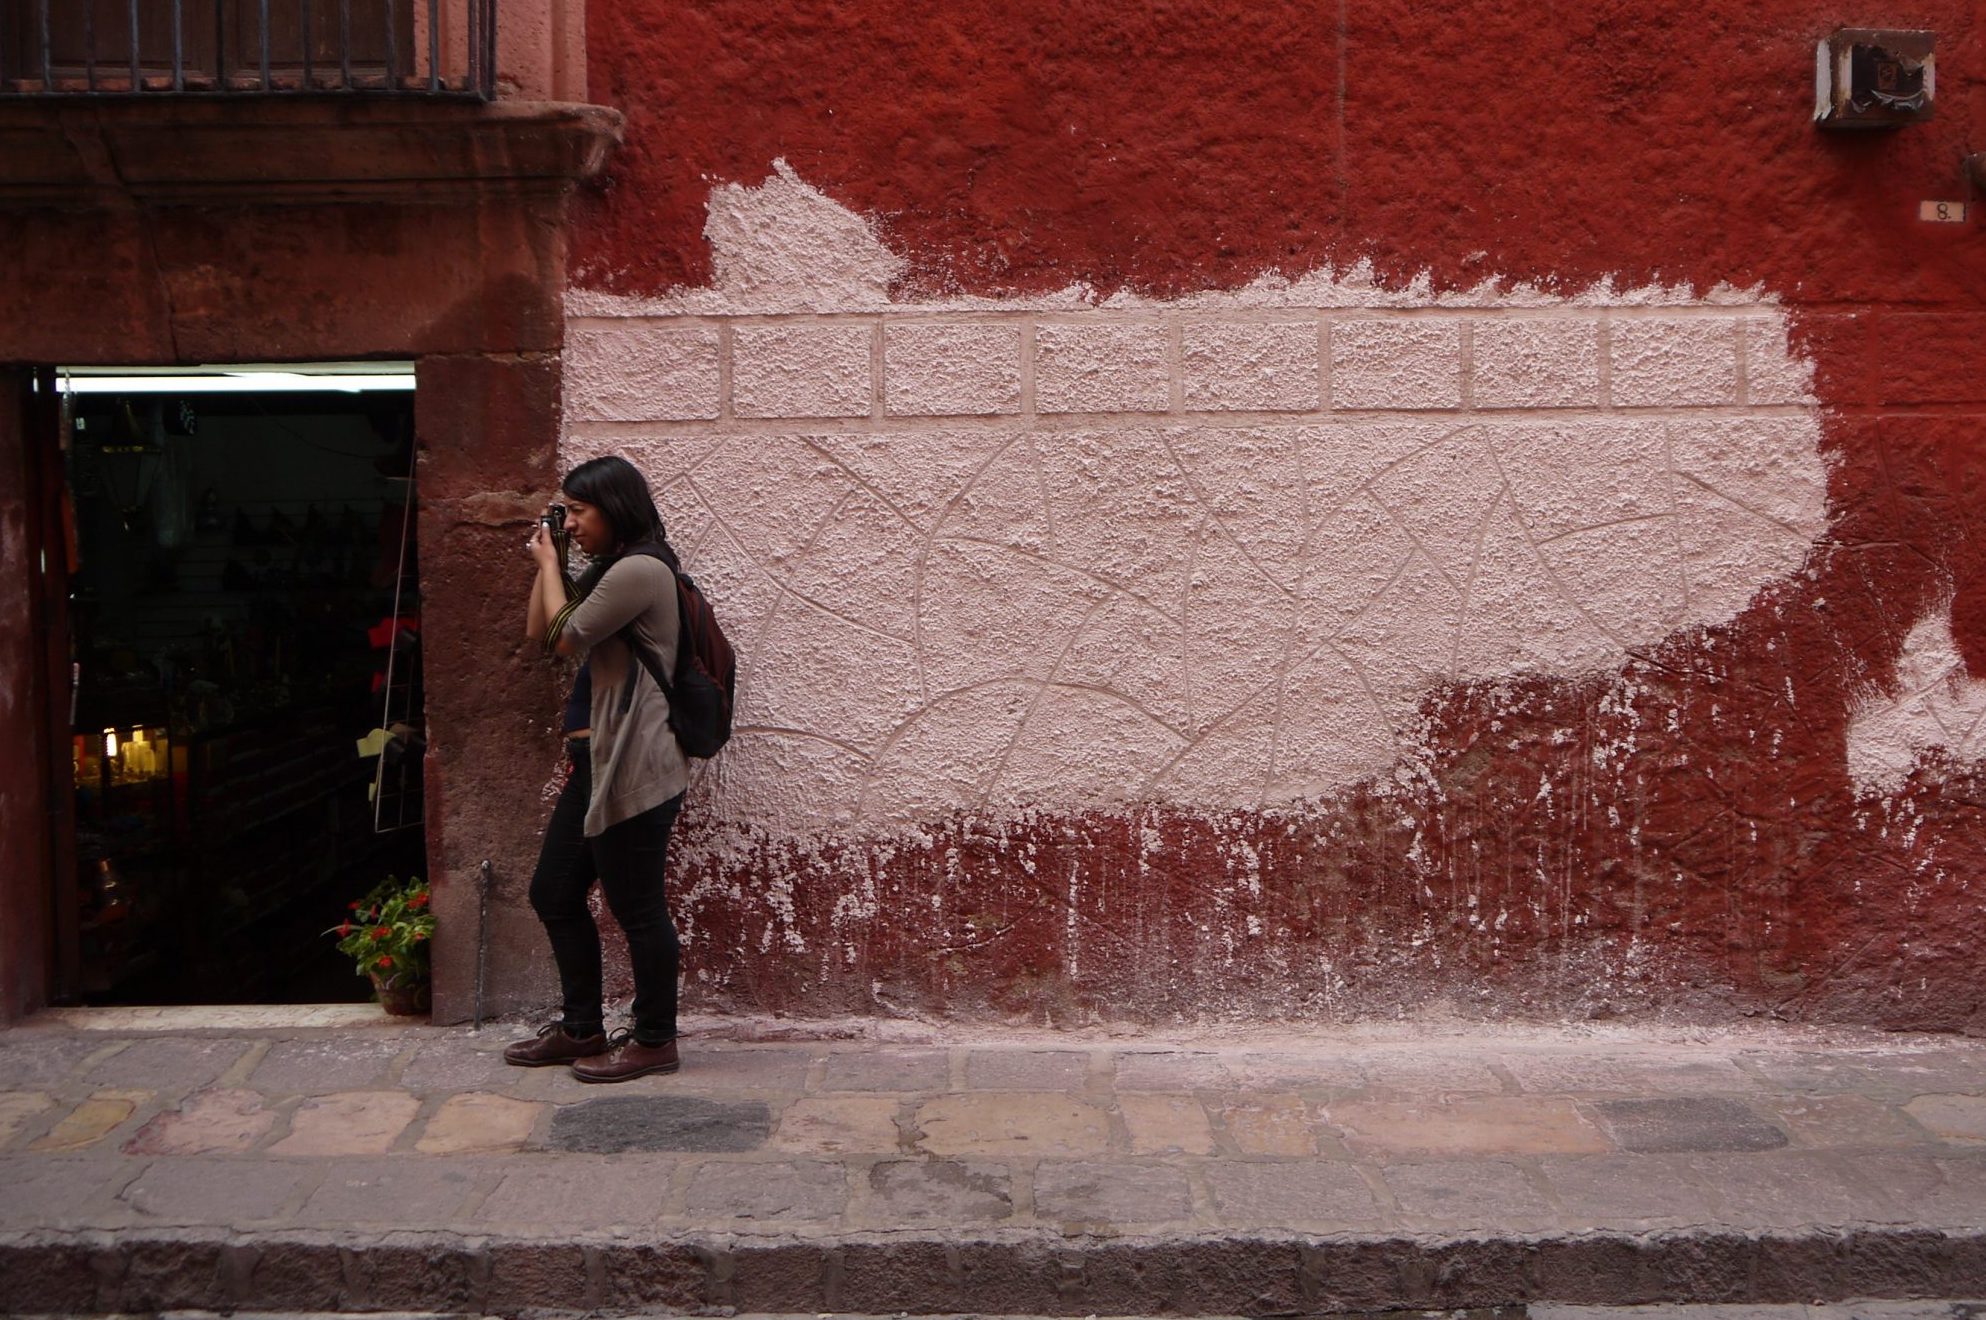 A woman in front of a colorful wall takes photos on a street in Guanajuato, Mexico